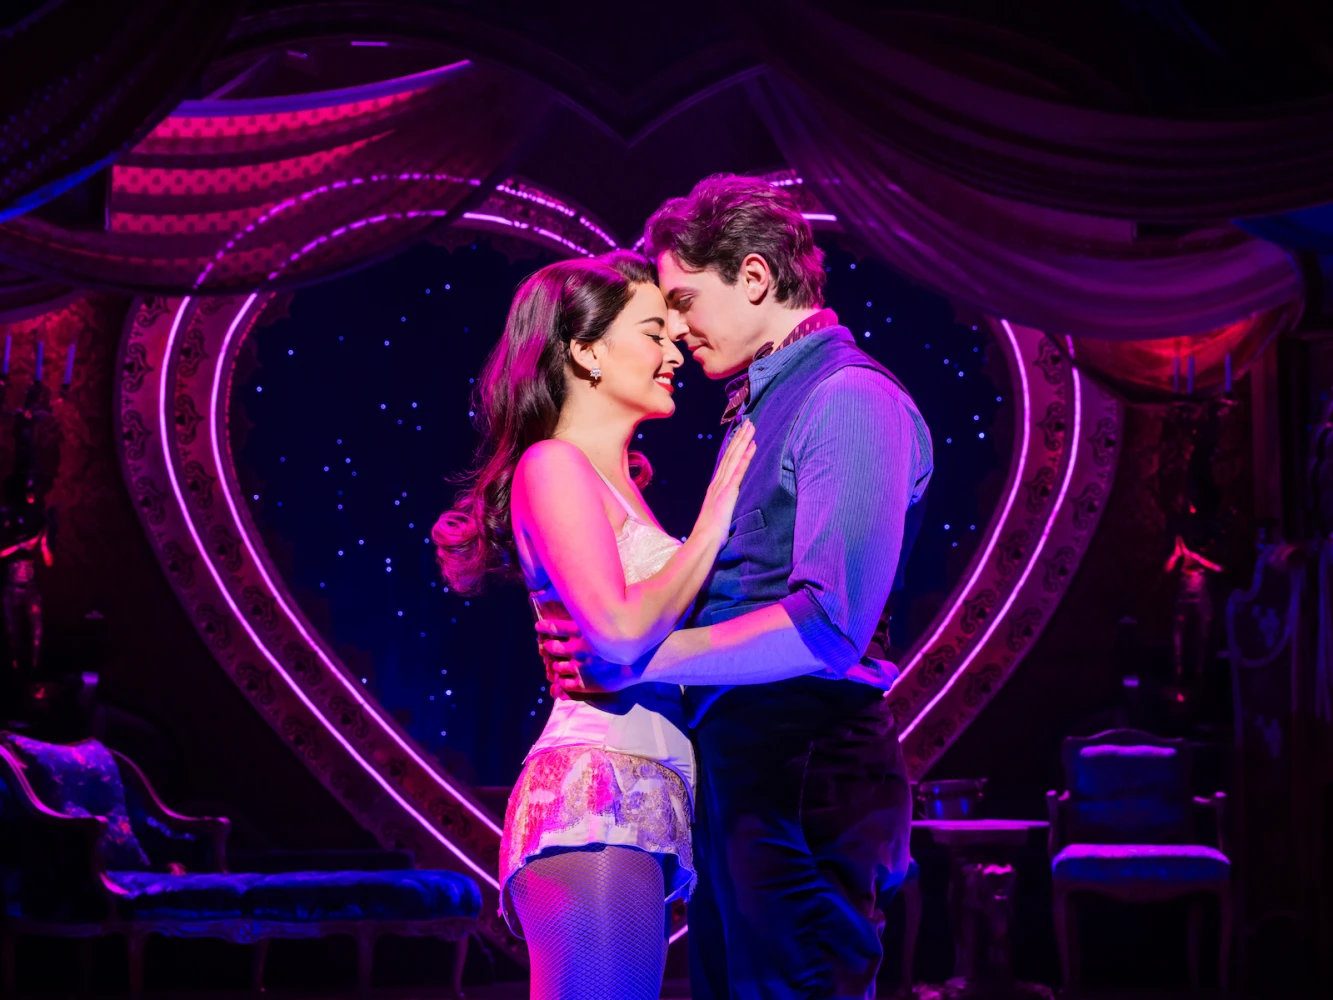 Moulin Rouge! The Musical on Broadway: What to expect - 6